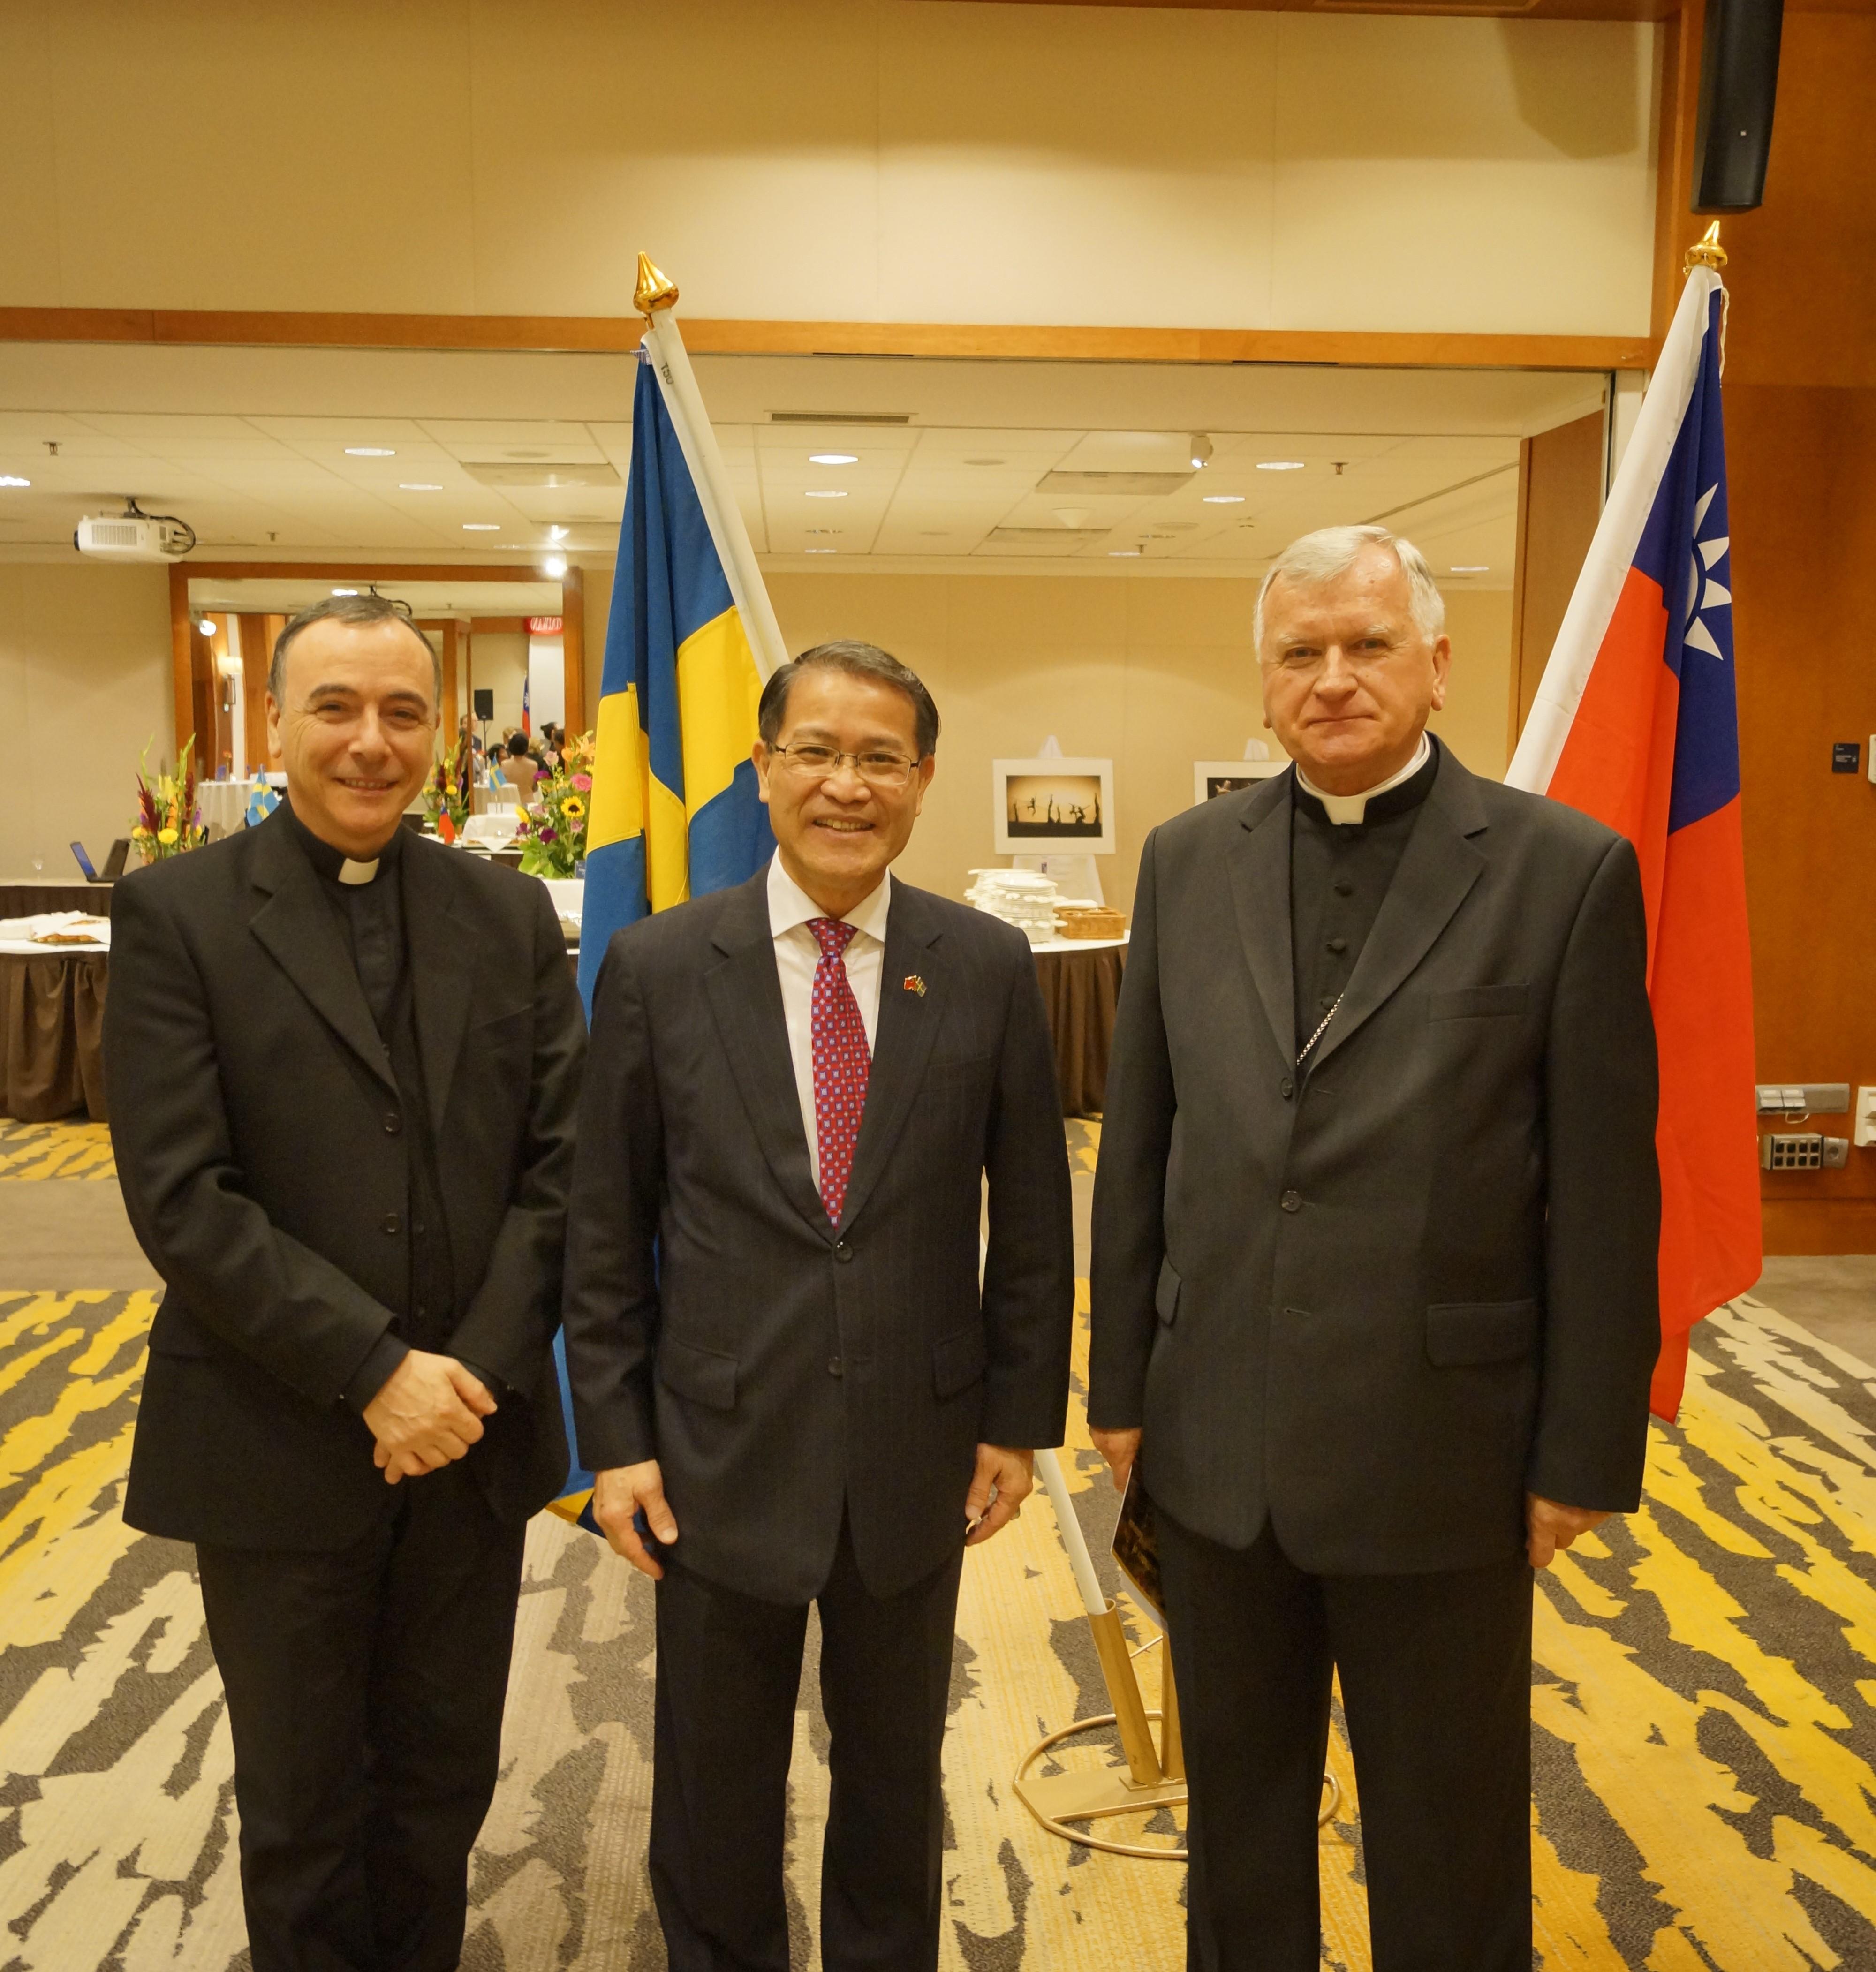 Ambassador Liao with Ambassador of the Holy See to Sweden Henryk Józef Nowacki (1st from the right) and Minister Gian Luca Perici (1st from left).